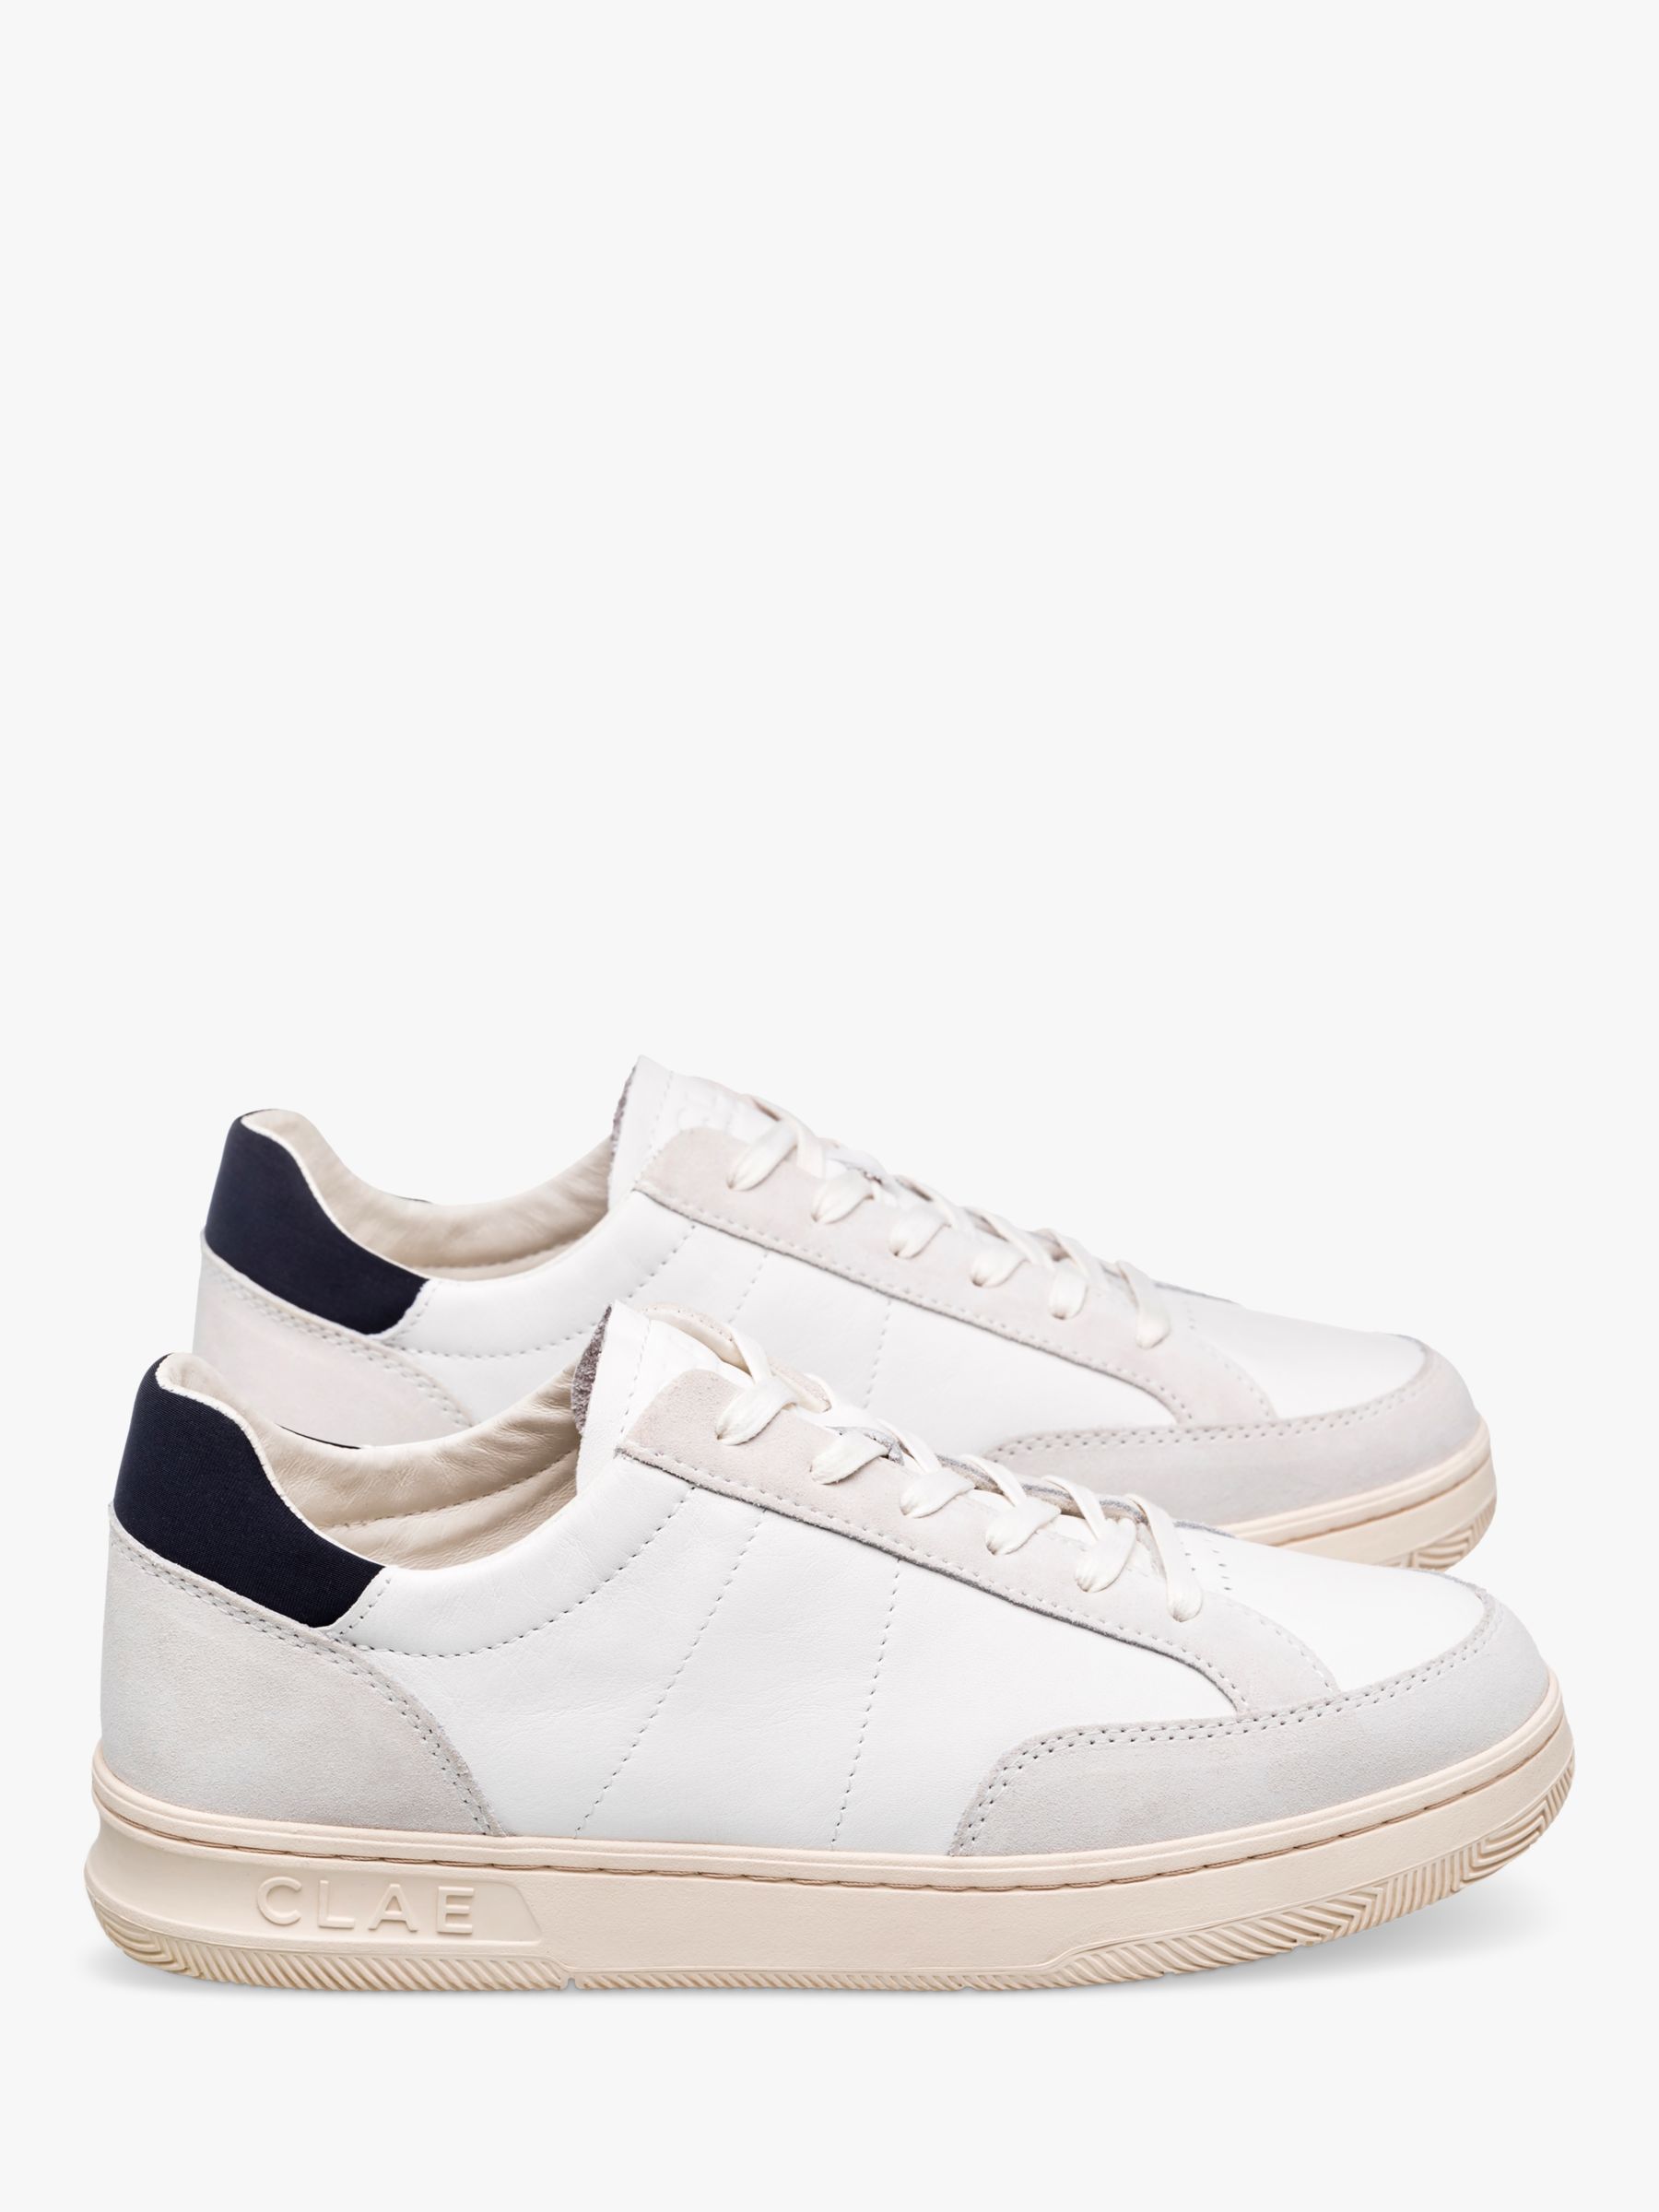 CLAE Monroe Leather Lace Up Trainers, White/Navy, 8